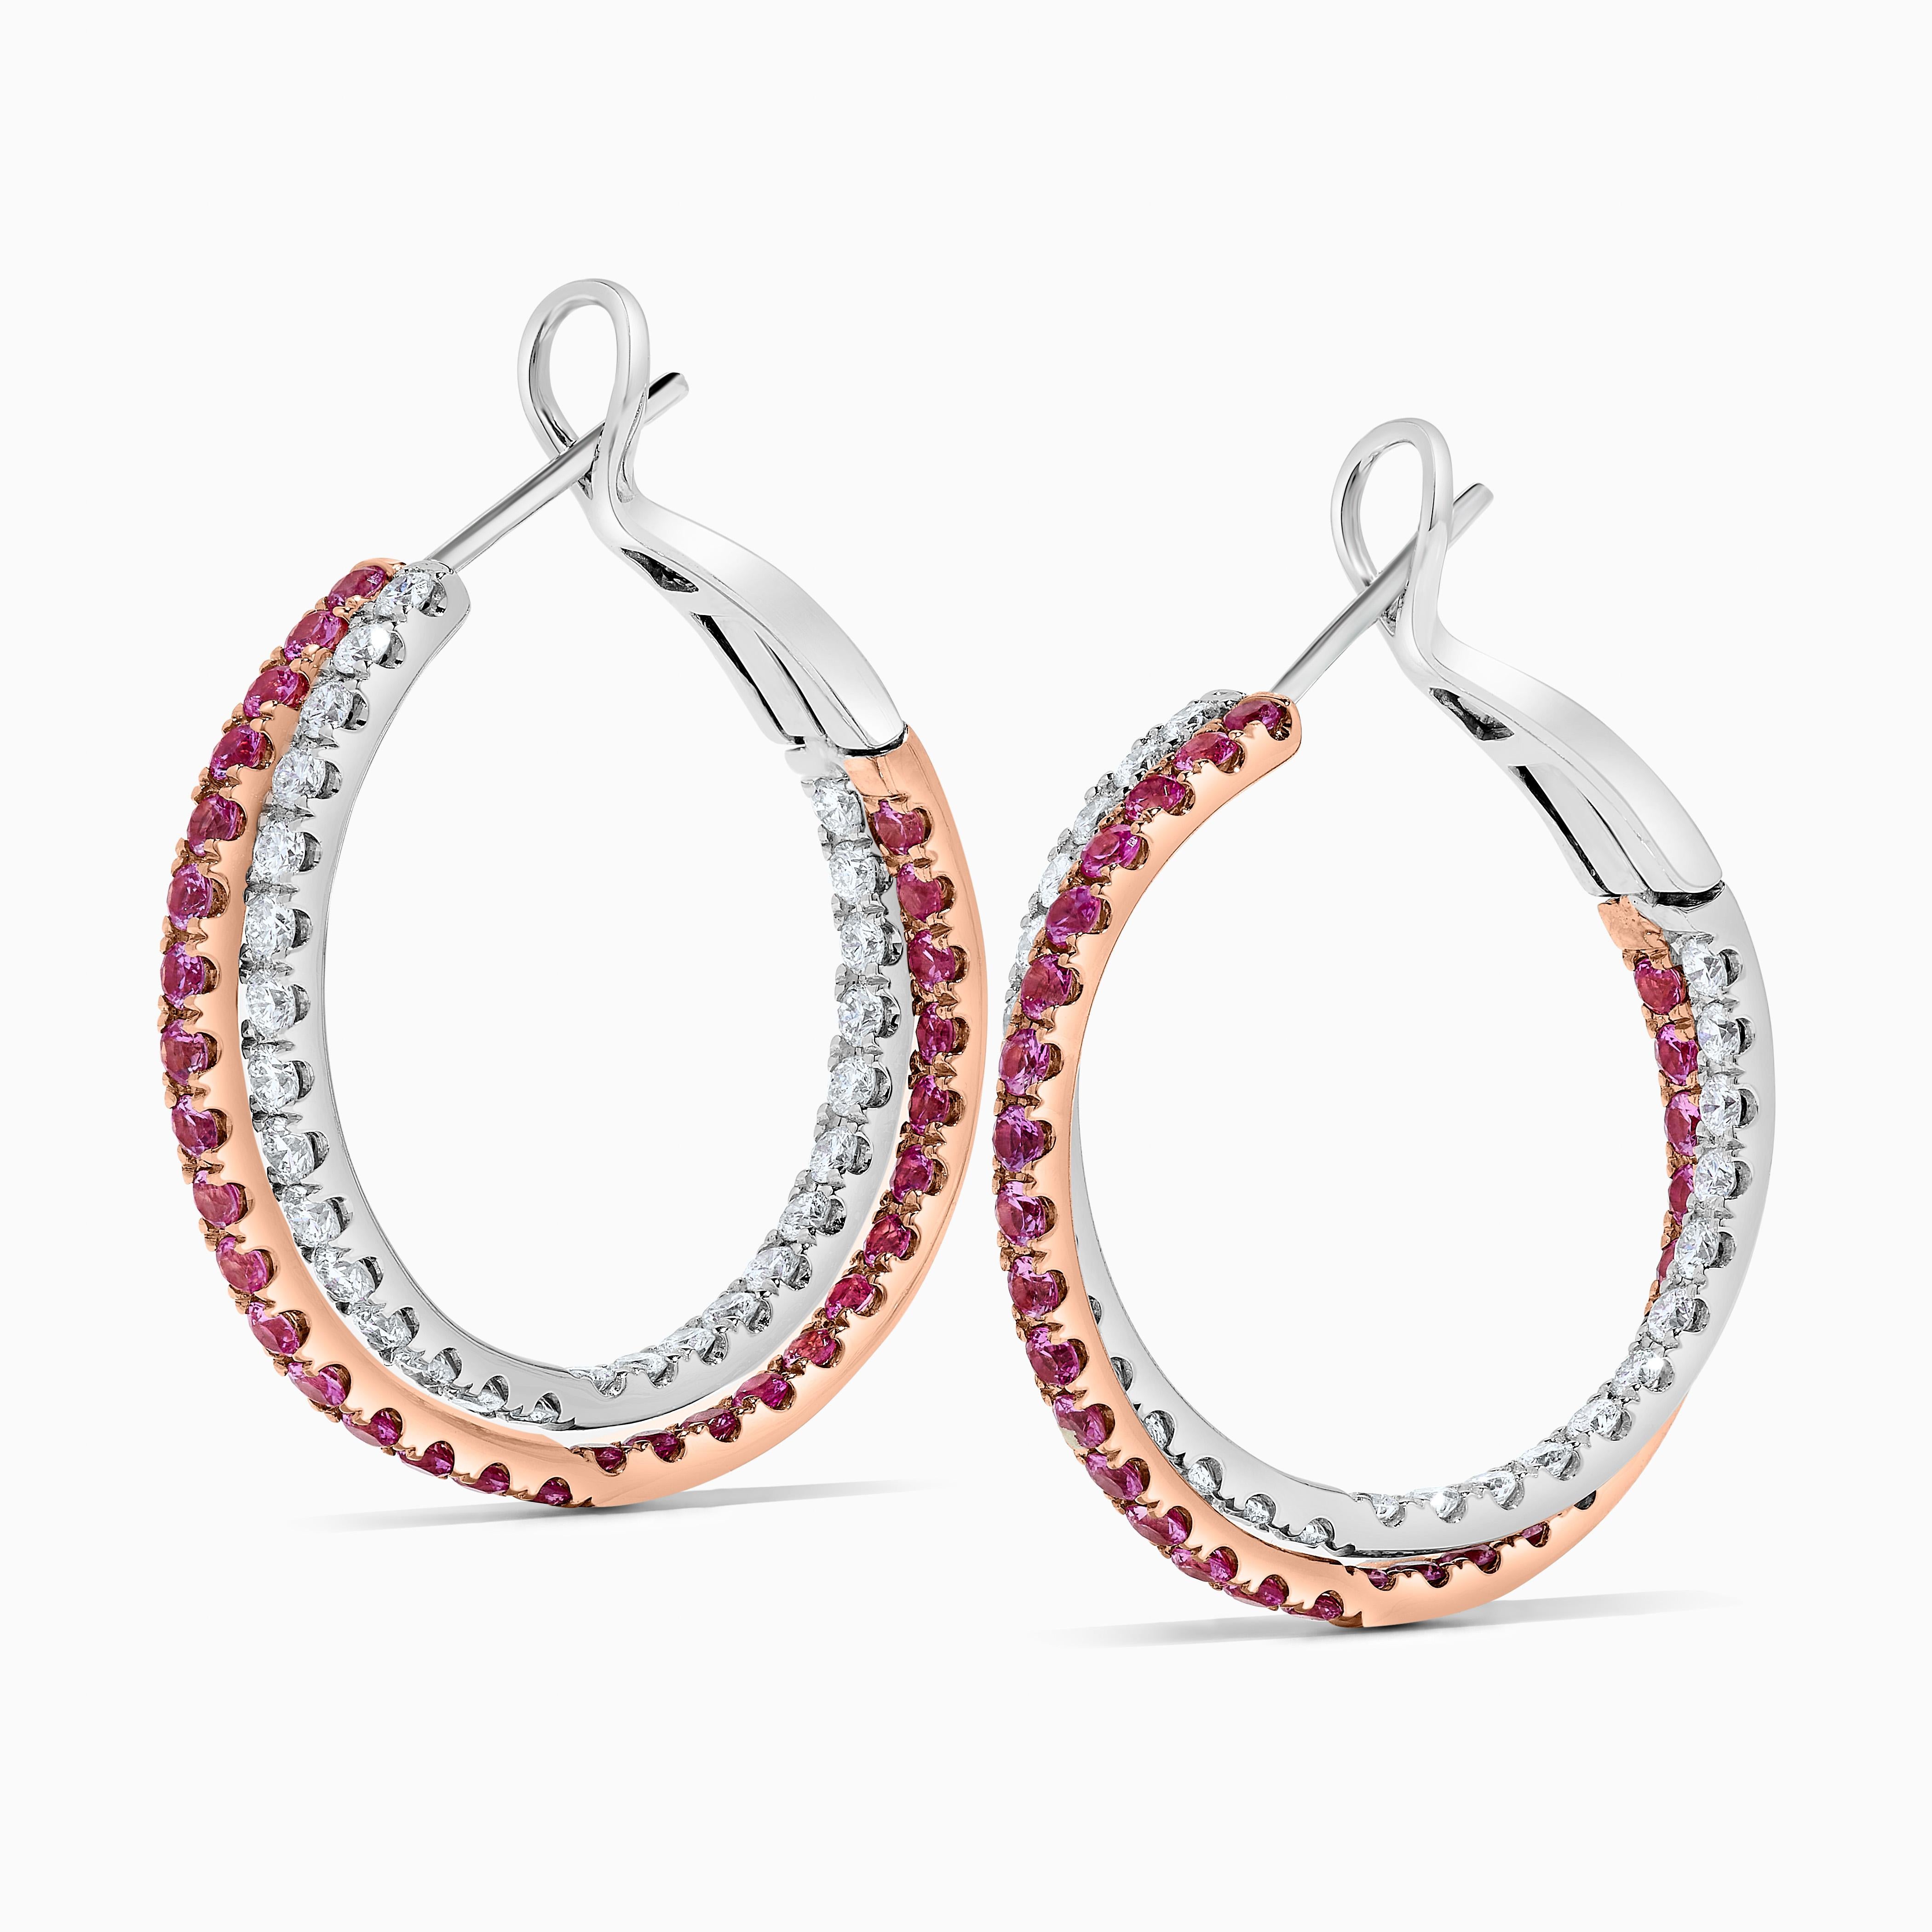 RareGemWorld's classic sapphire earrings. Mounted in a beautiful 14K Rose and White Gold setting with natural round cut pink sapphires. These earrings include both natural round pink sapphires and natural round white diamond melee in a beautiful